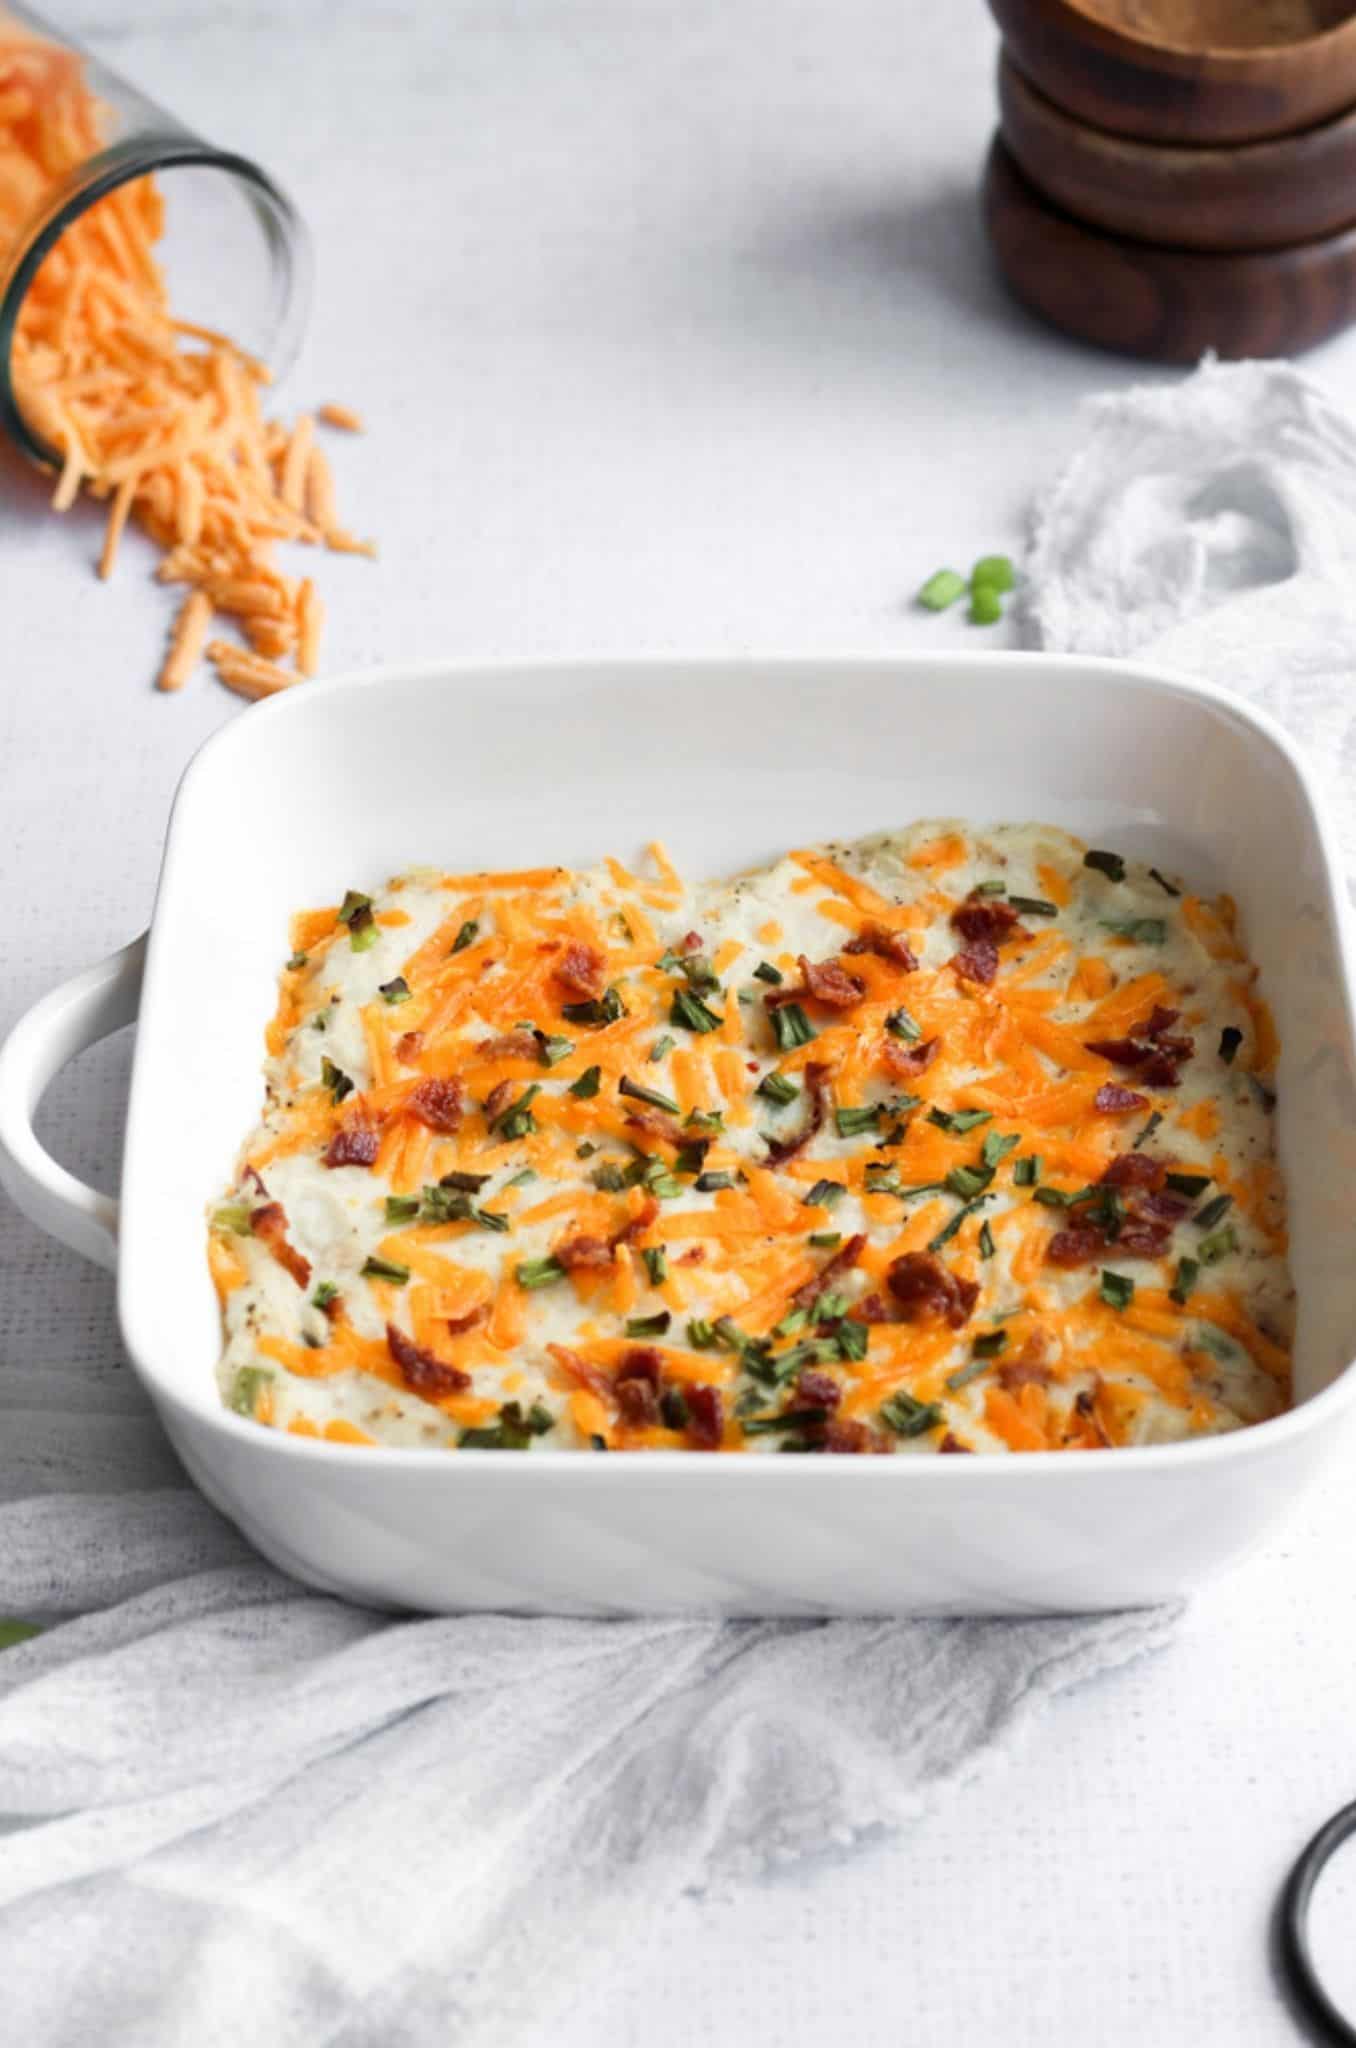 twice baked cauliflower casserole in a white square baking dish on a blue linen